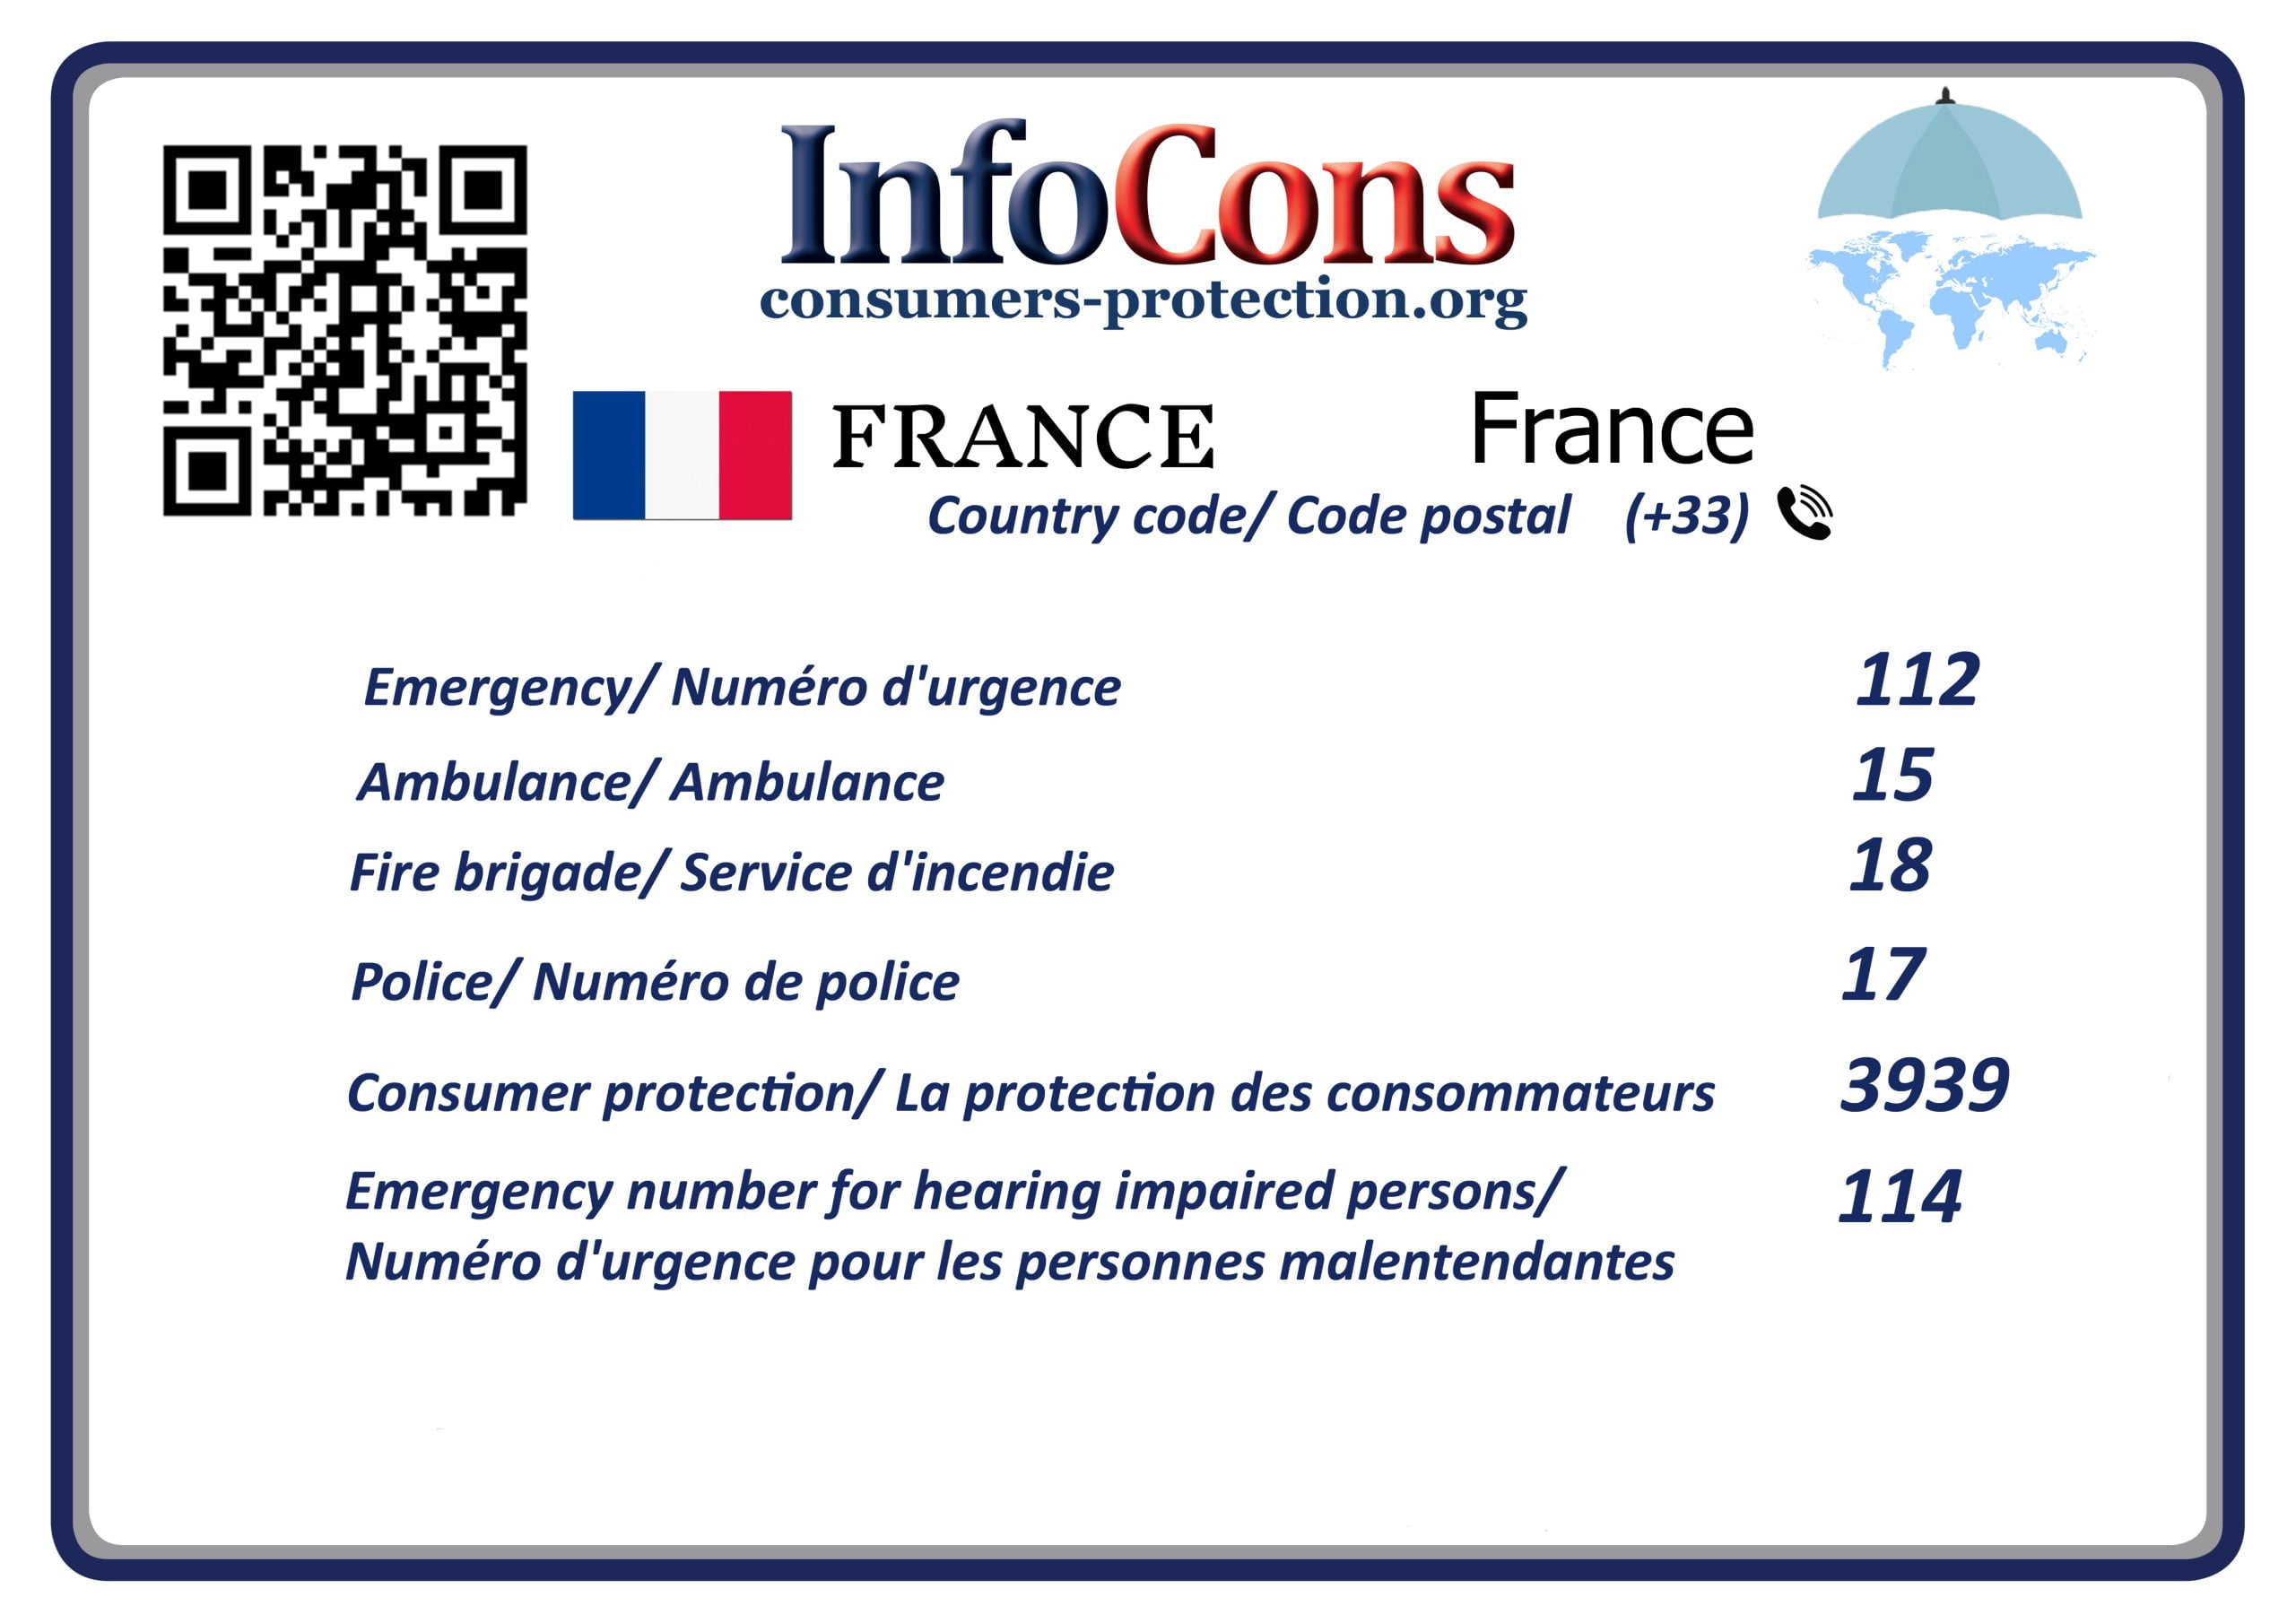 Protection des consommateurs France Consumers Protection France